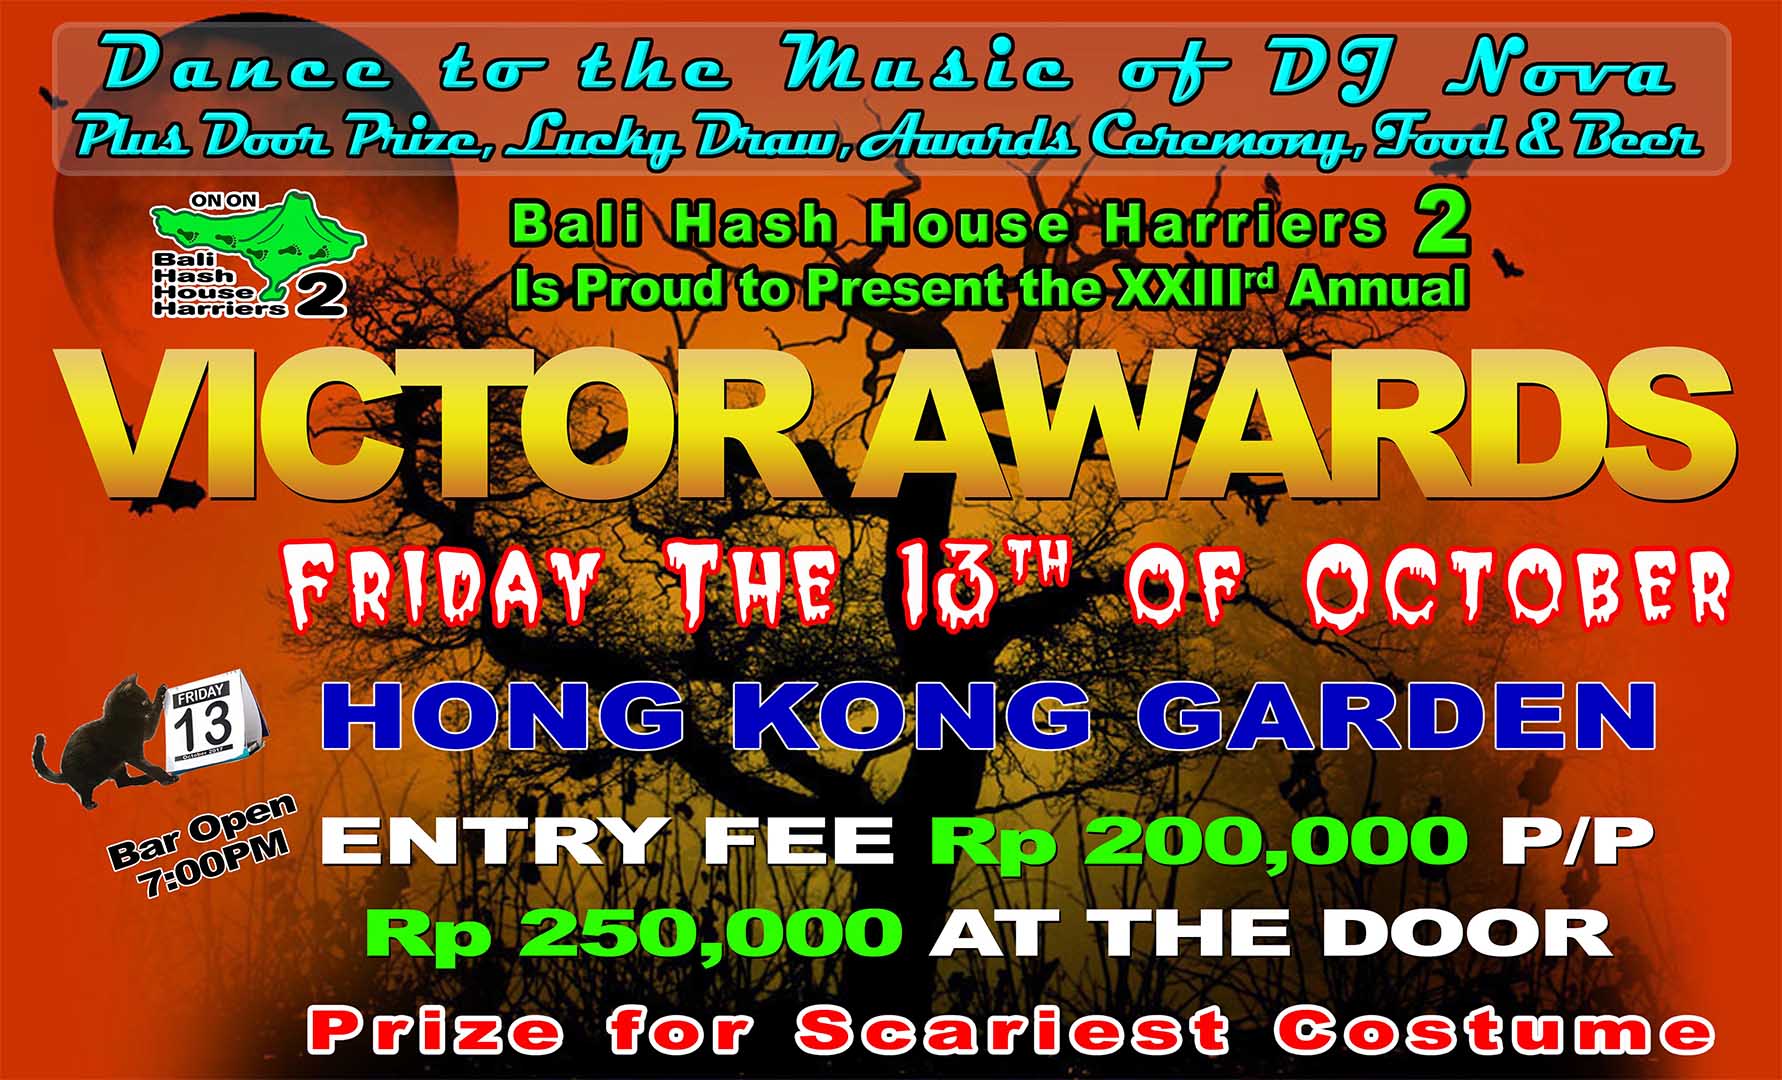 Bali Hash House Harriers 2 Is Proud to Present the XXIIIrd Annual VICTOR AWARDS